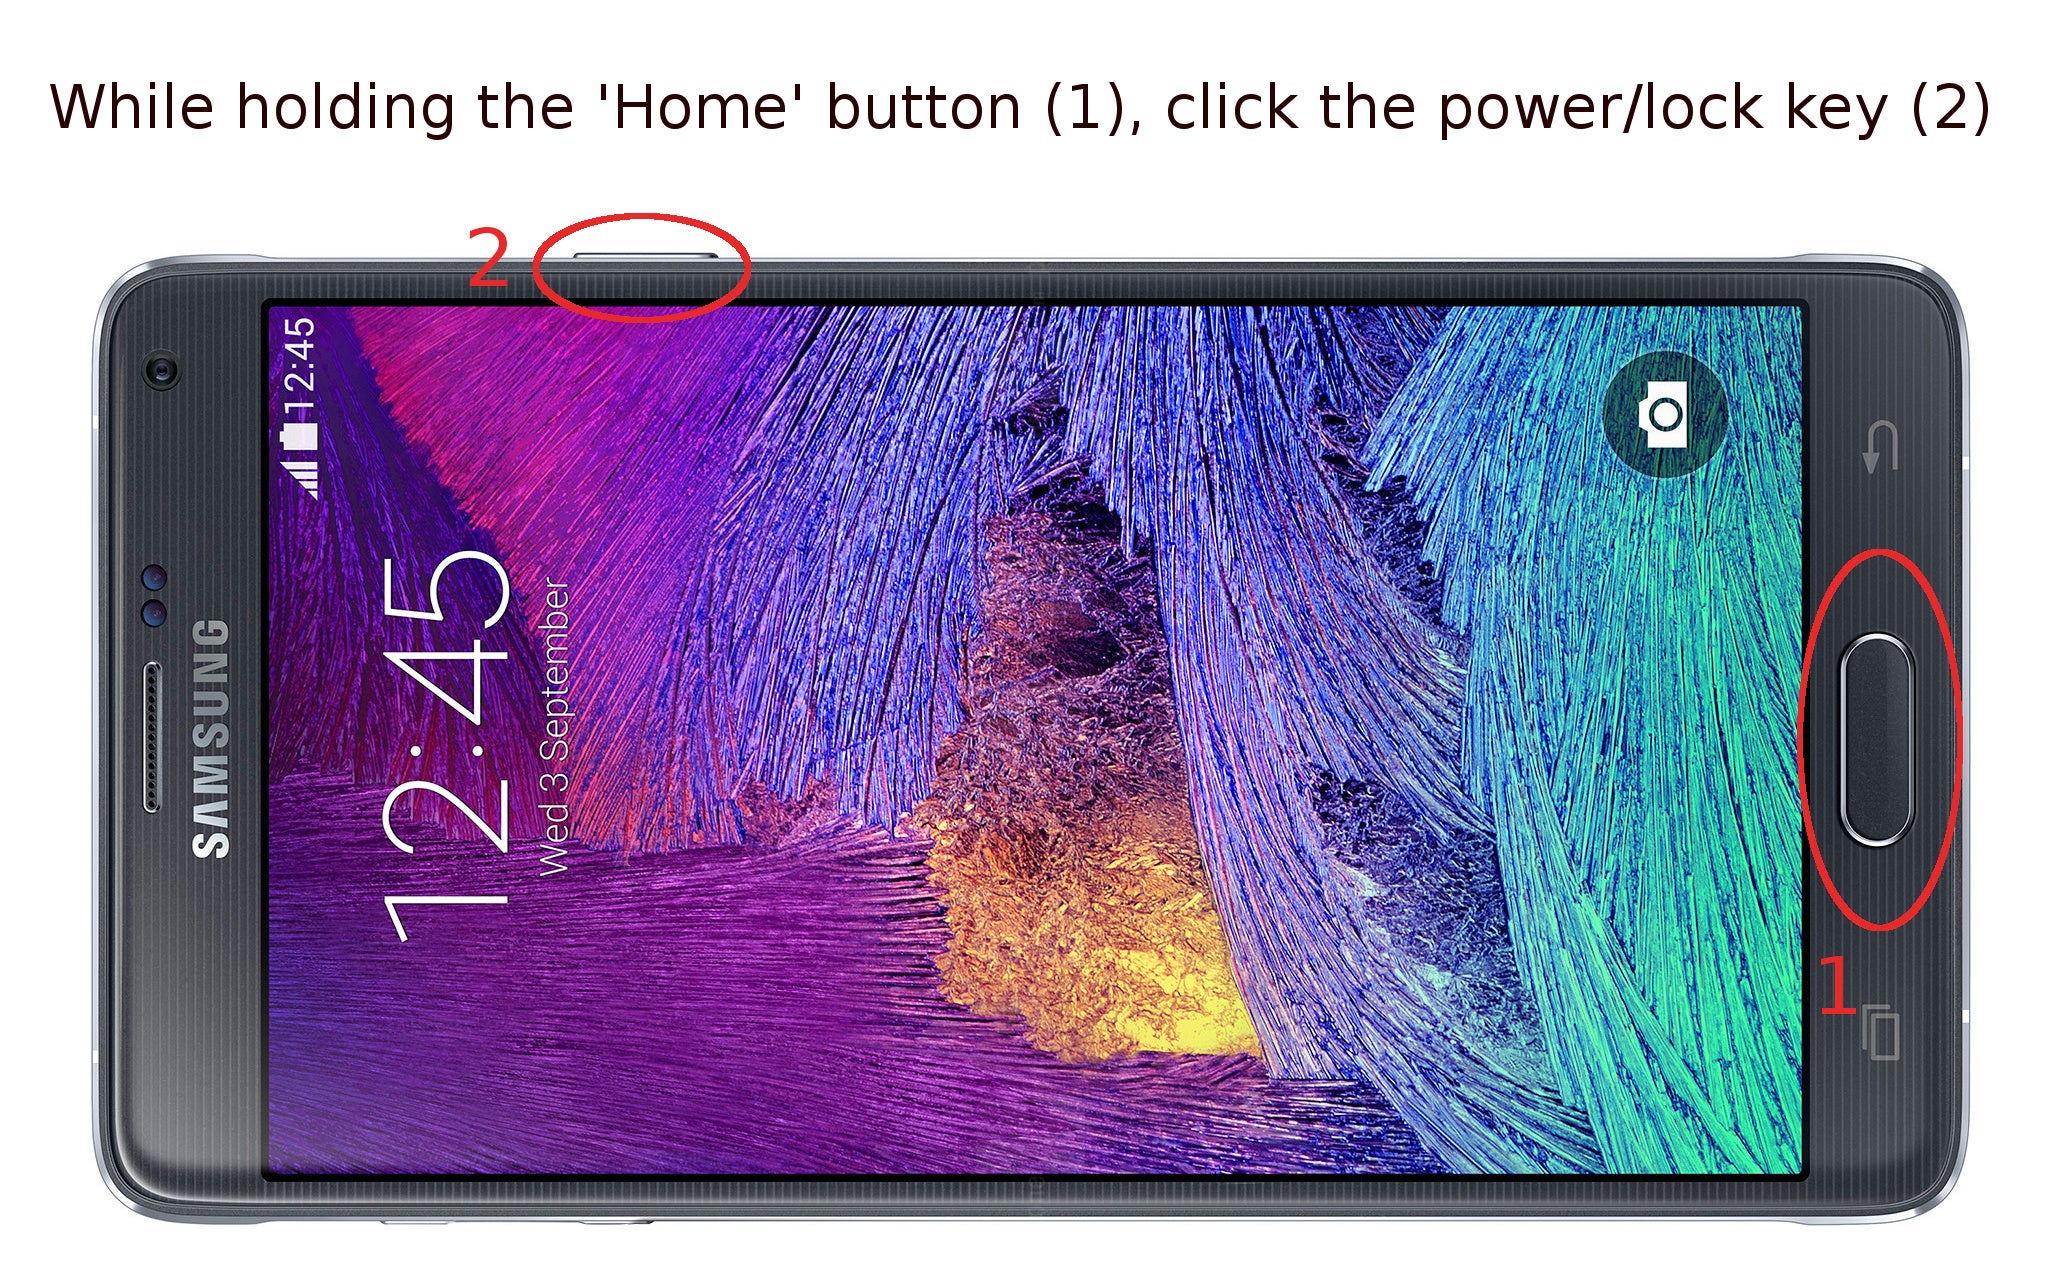 How to take a screenshot on the Samsung Galaxy Note 4 (Android TouchWiz tutorial)